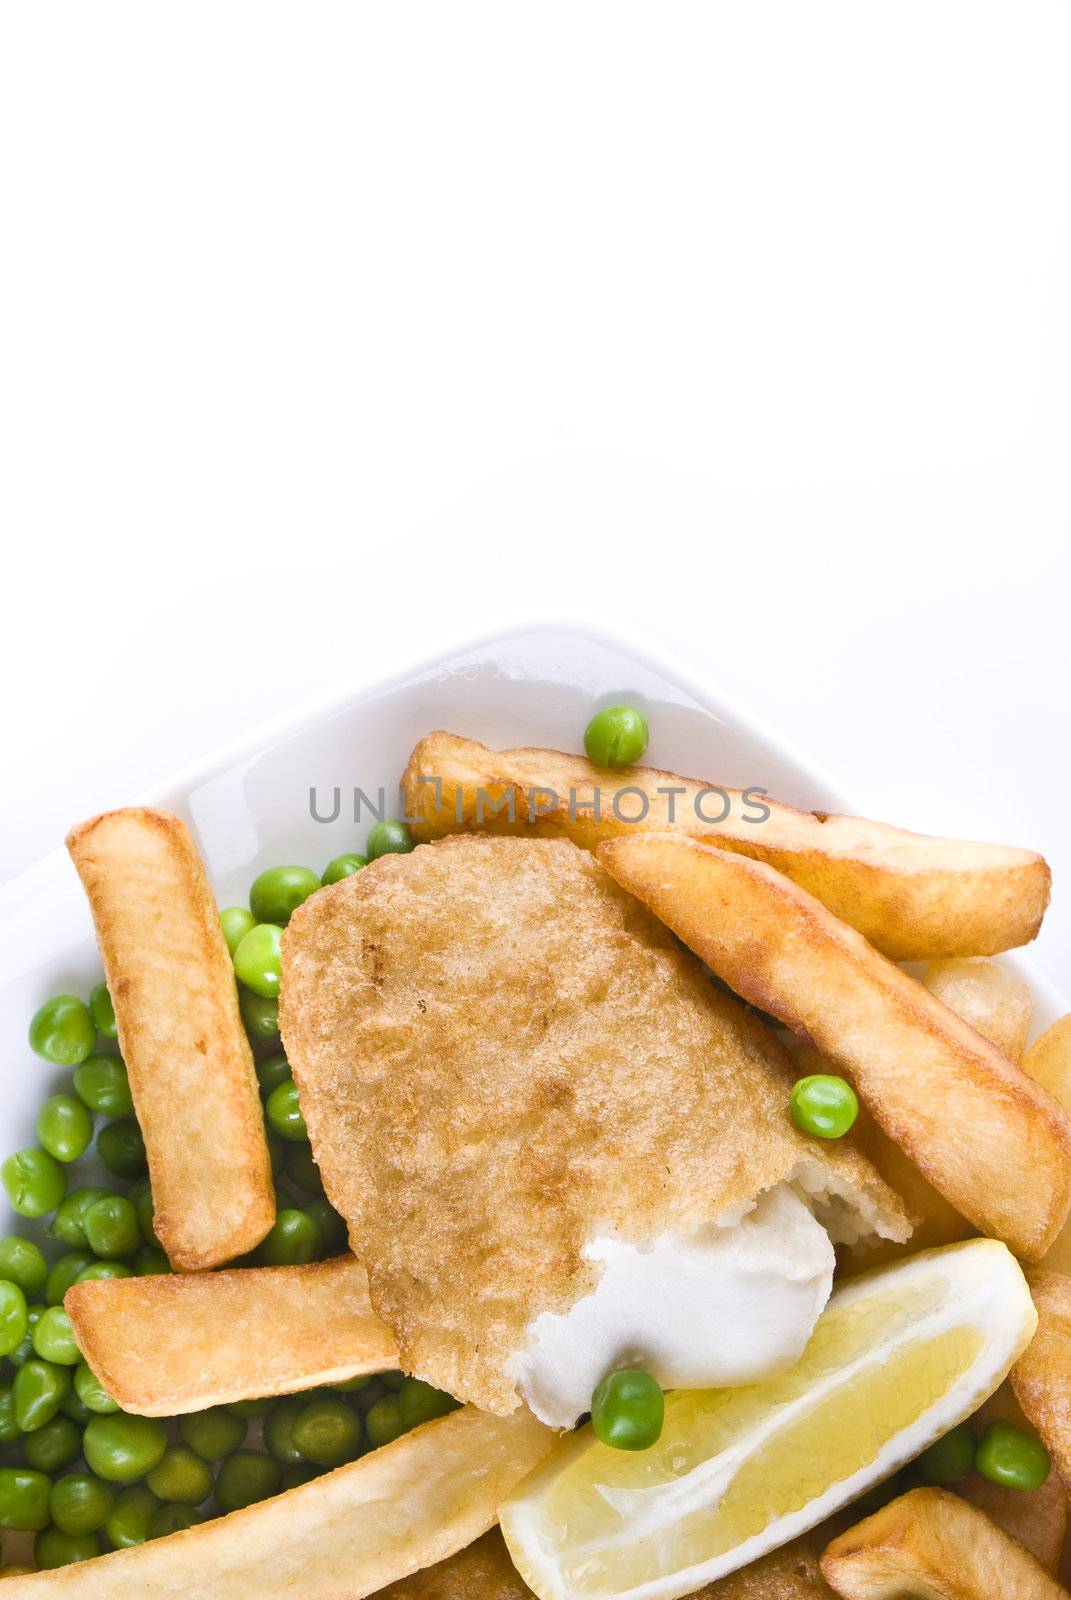 Fried fish and chips with lemon and peas - isolated